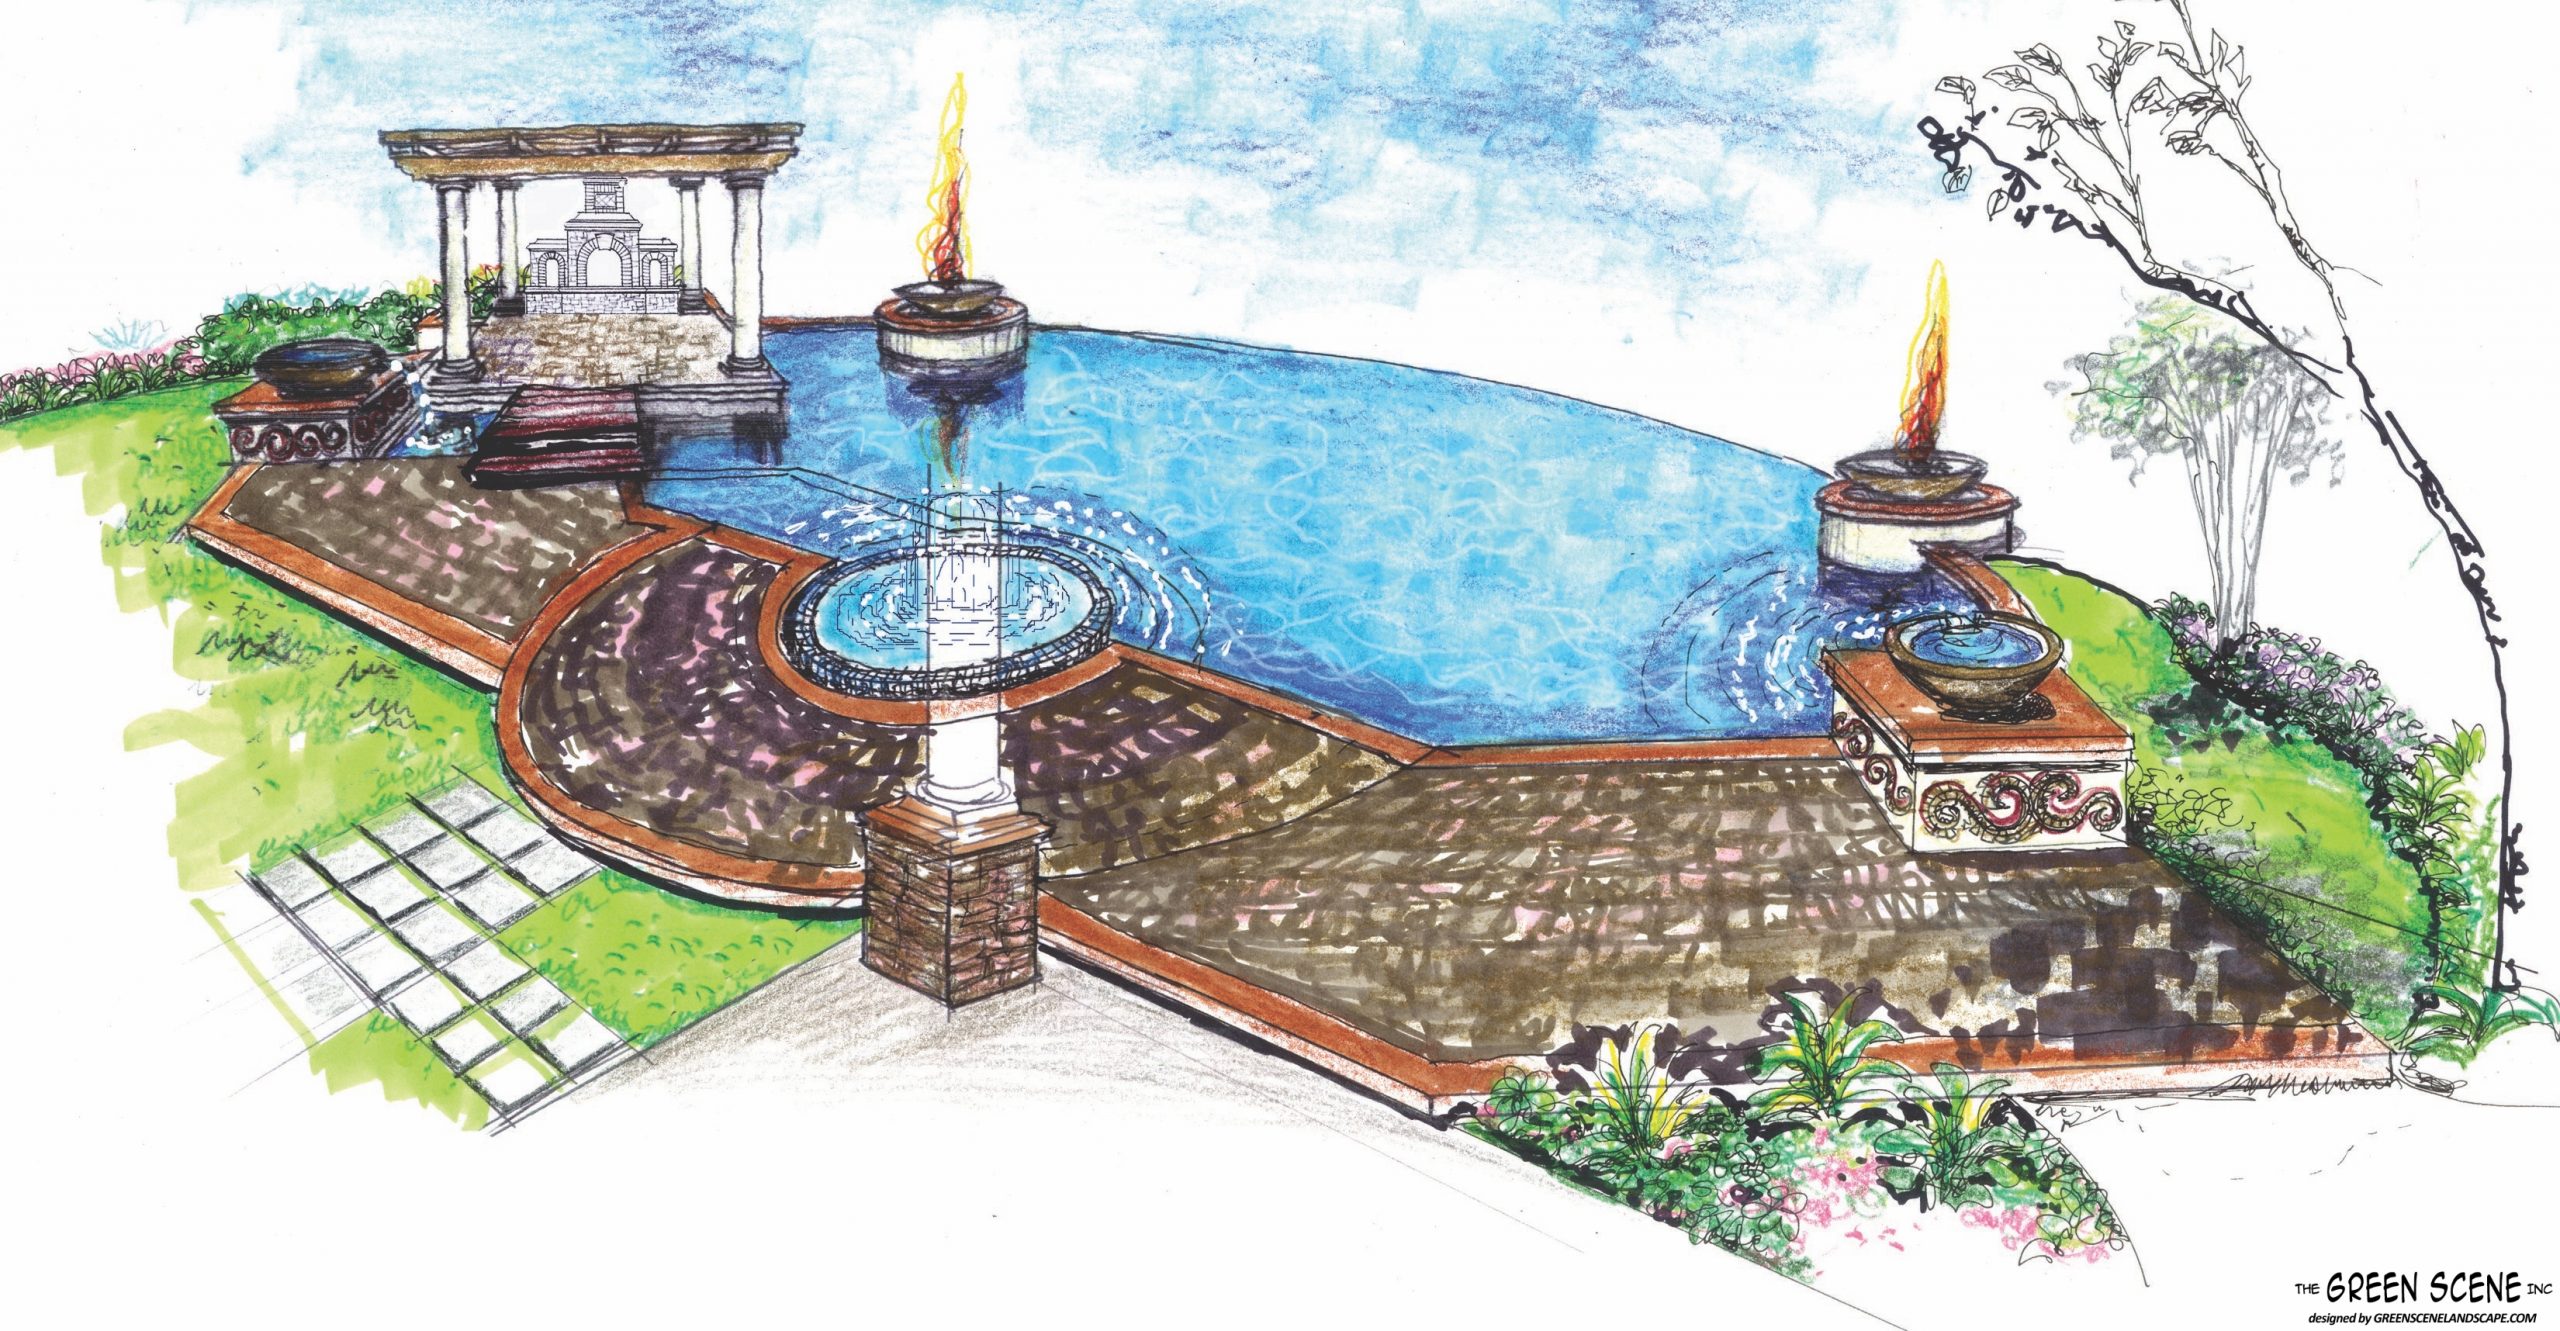 A picture perfect perspective drawing of a backyard pool design